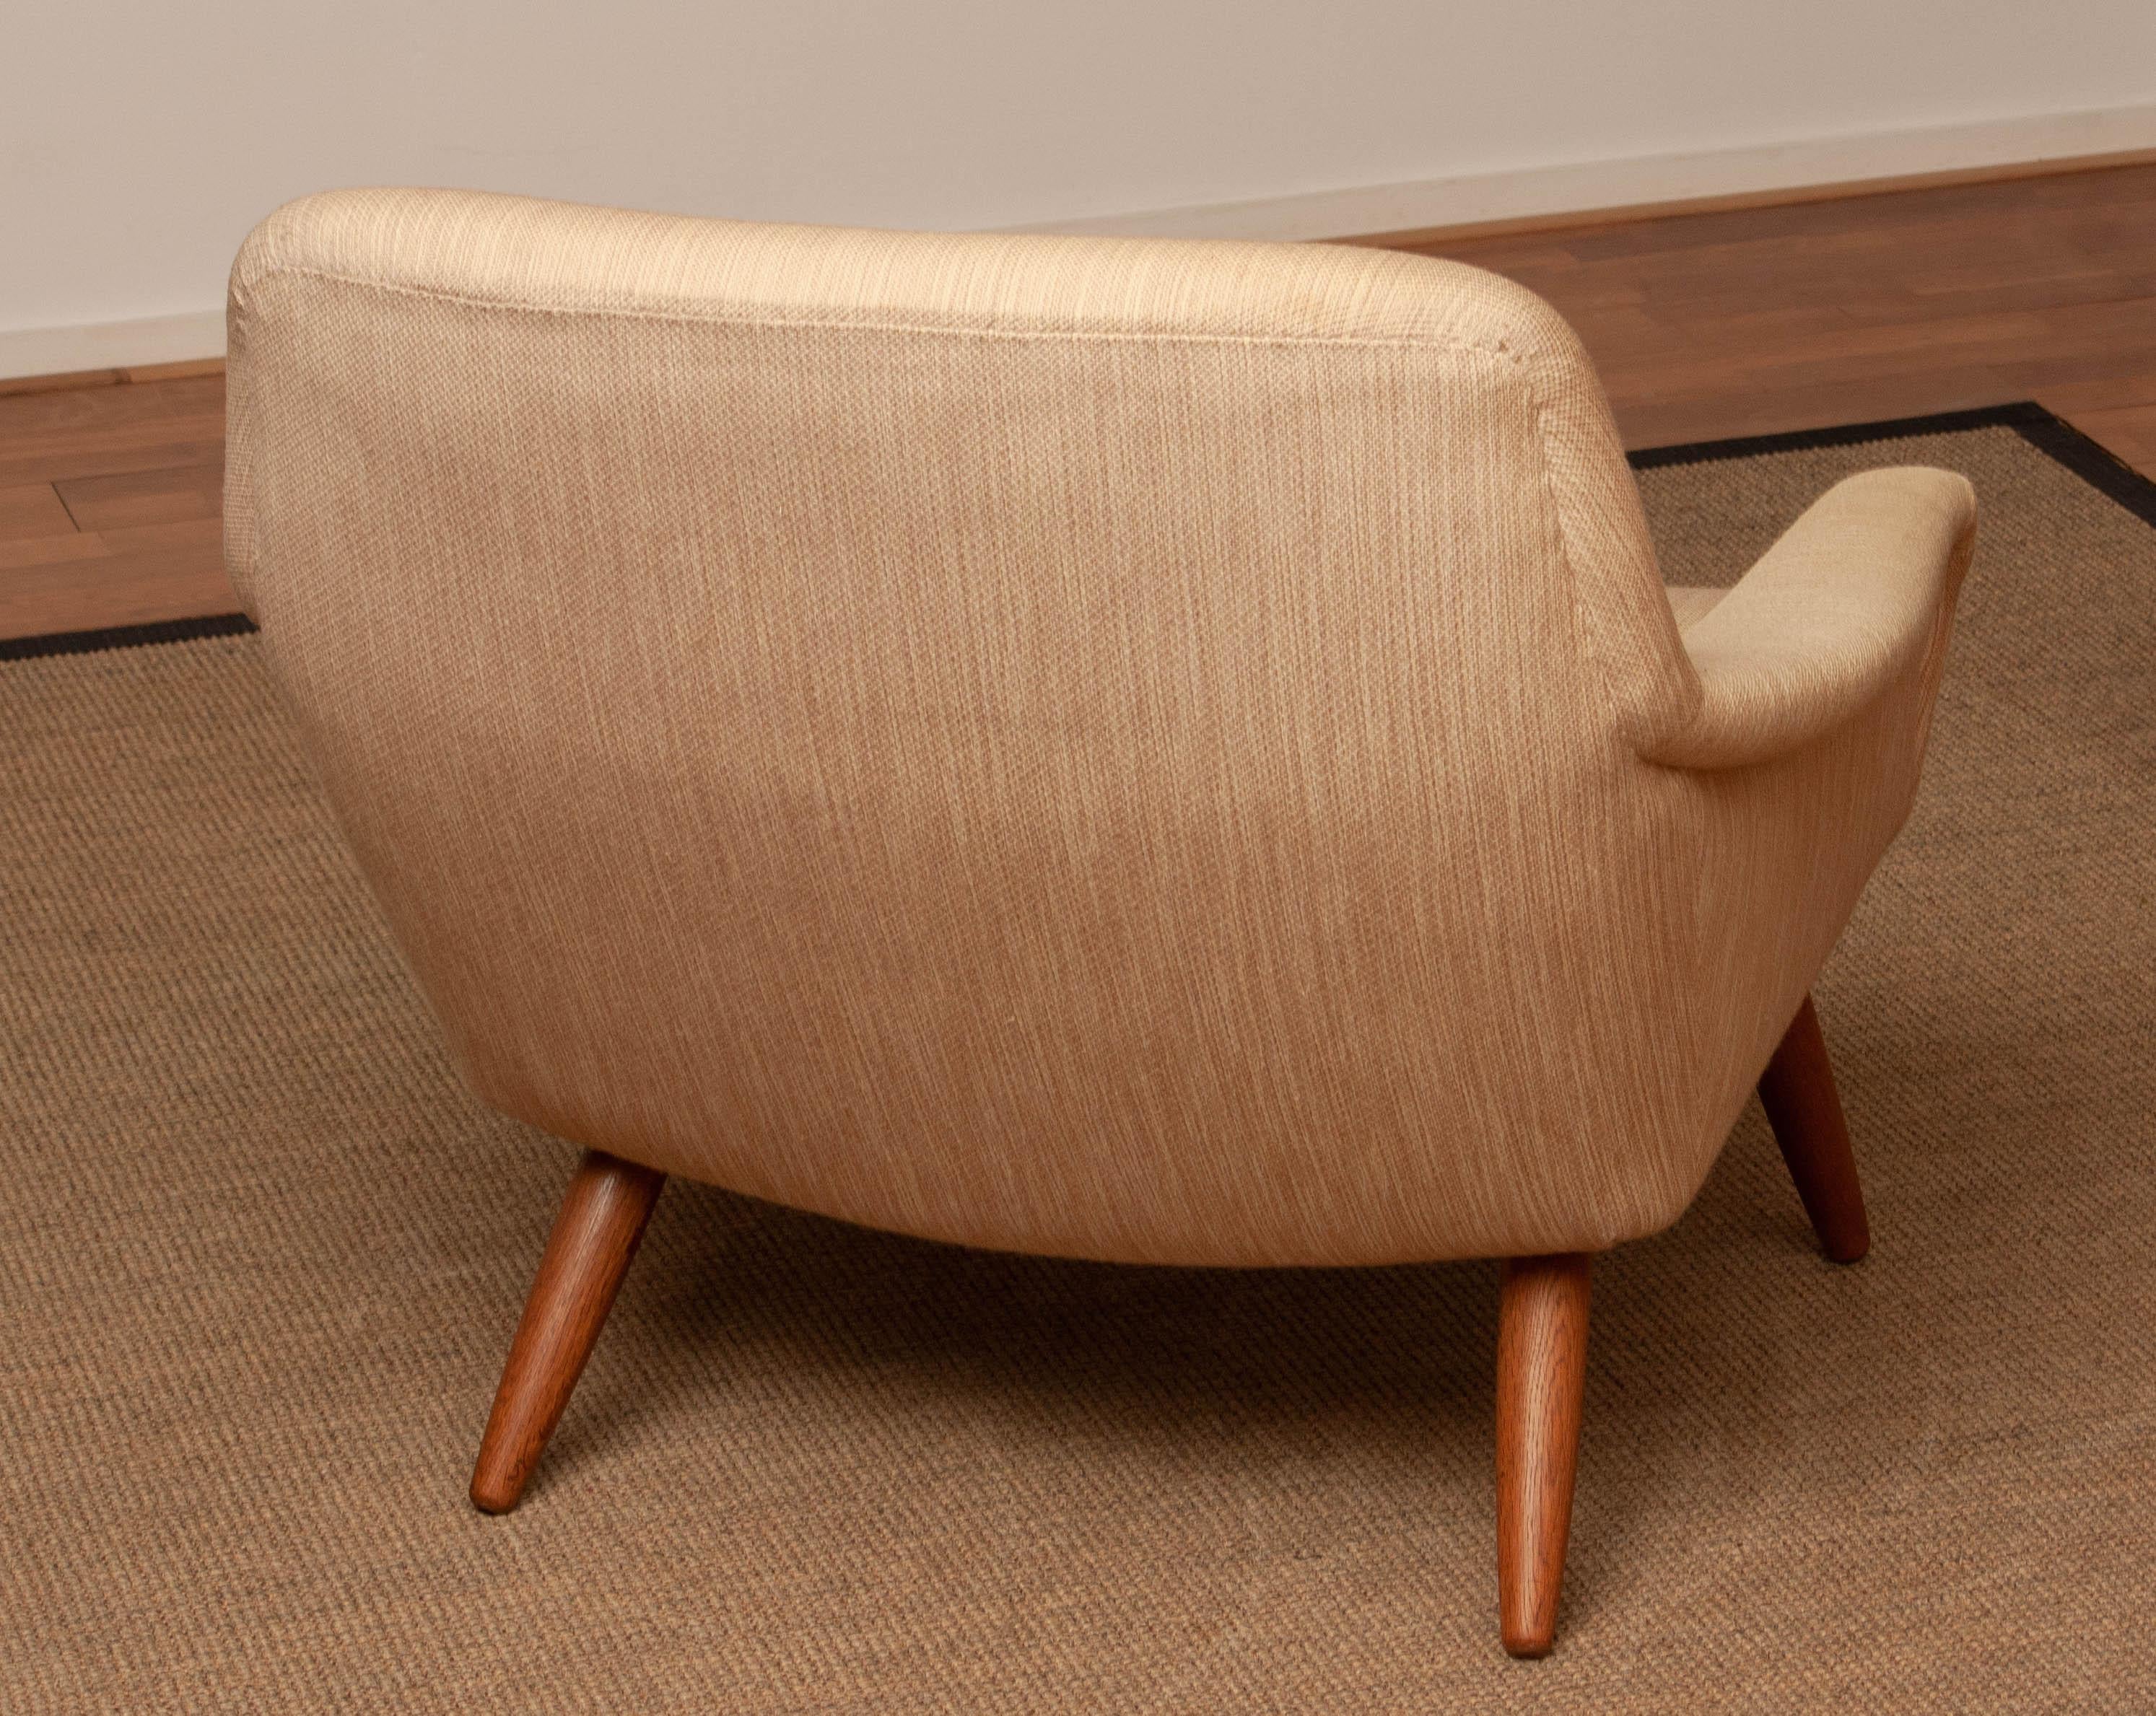 1960s Natural Wool and Oak Lounge Chair by Leif Hansen for Kronen in Denmark In Good Condition For Sale In Silvolde, Gelderland